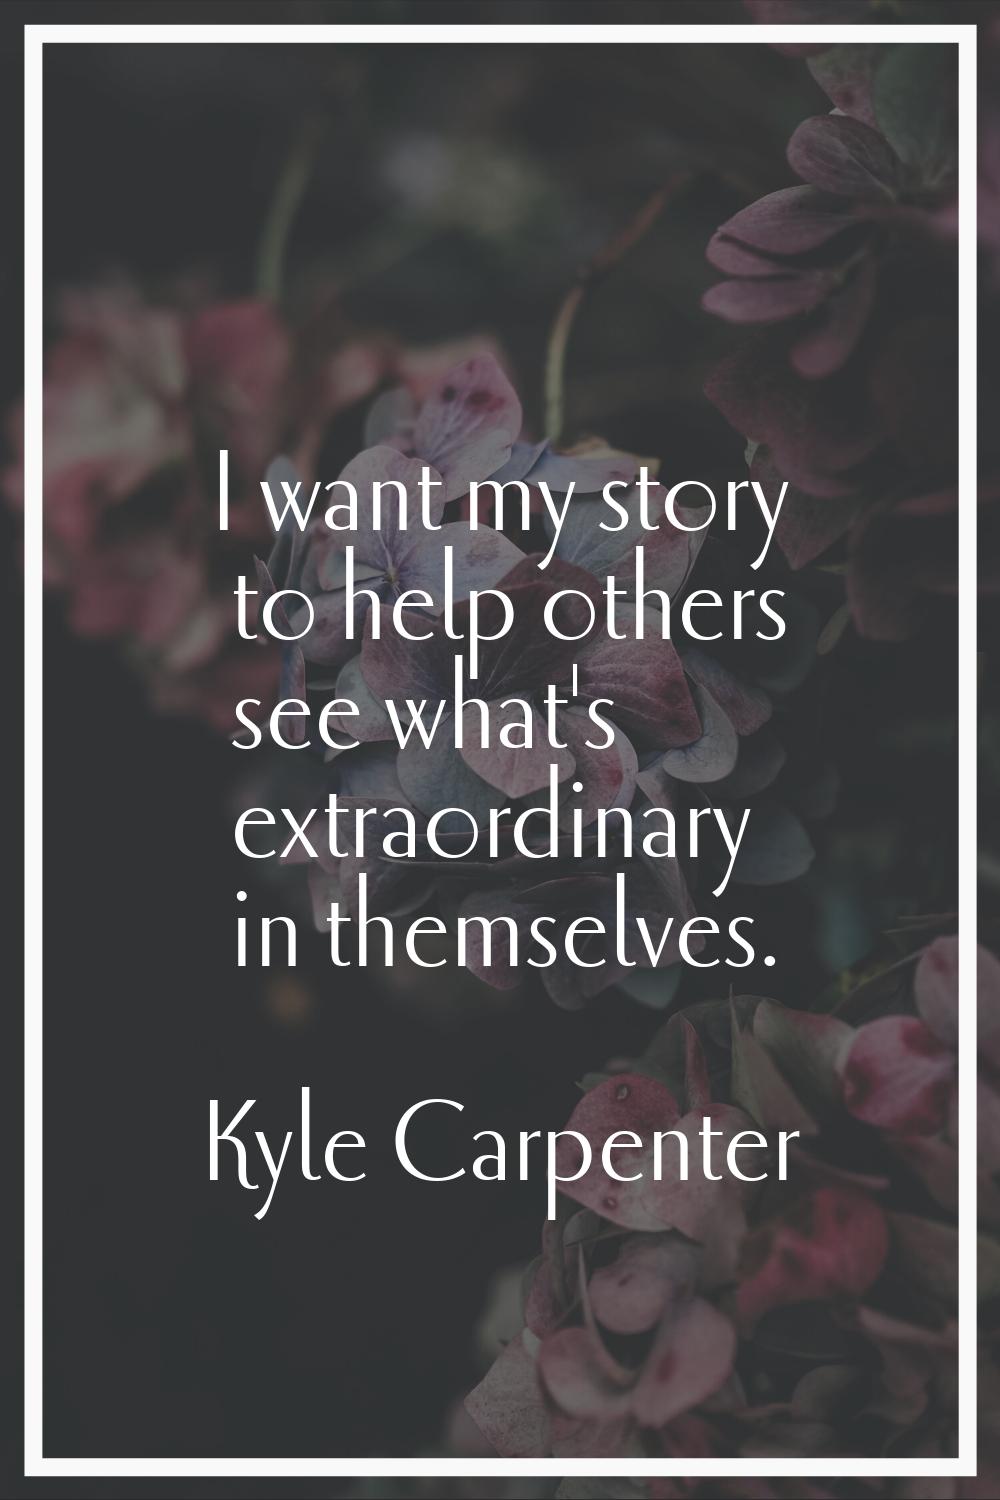 I want my story to help others see what's extraordinary in themselves.